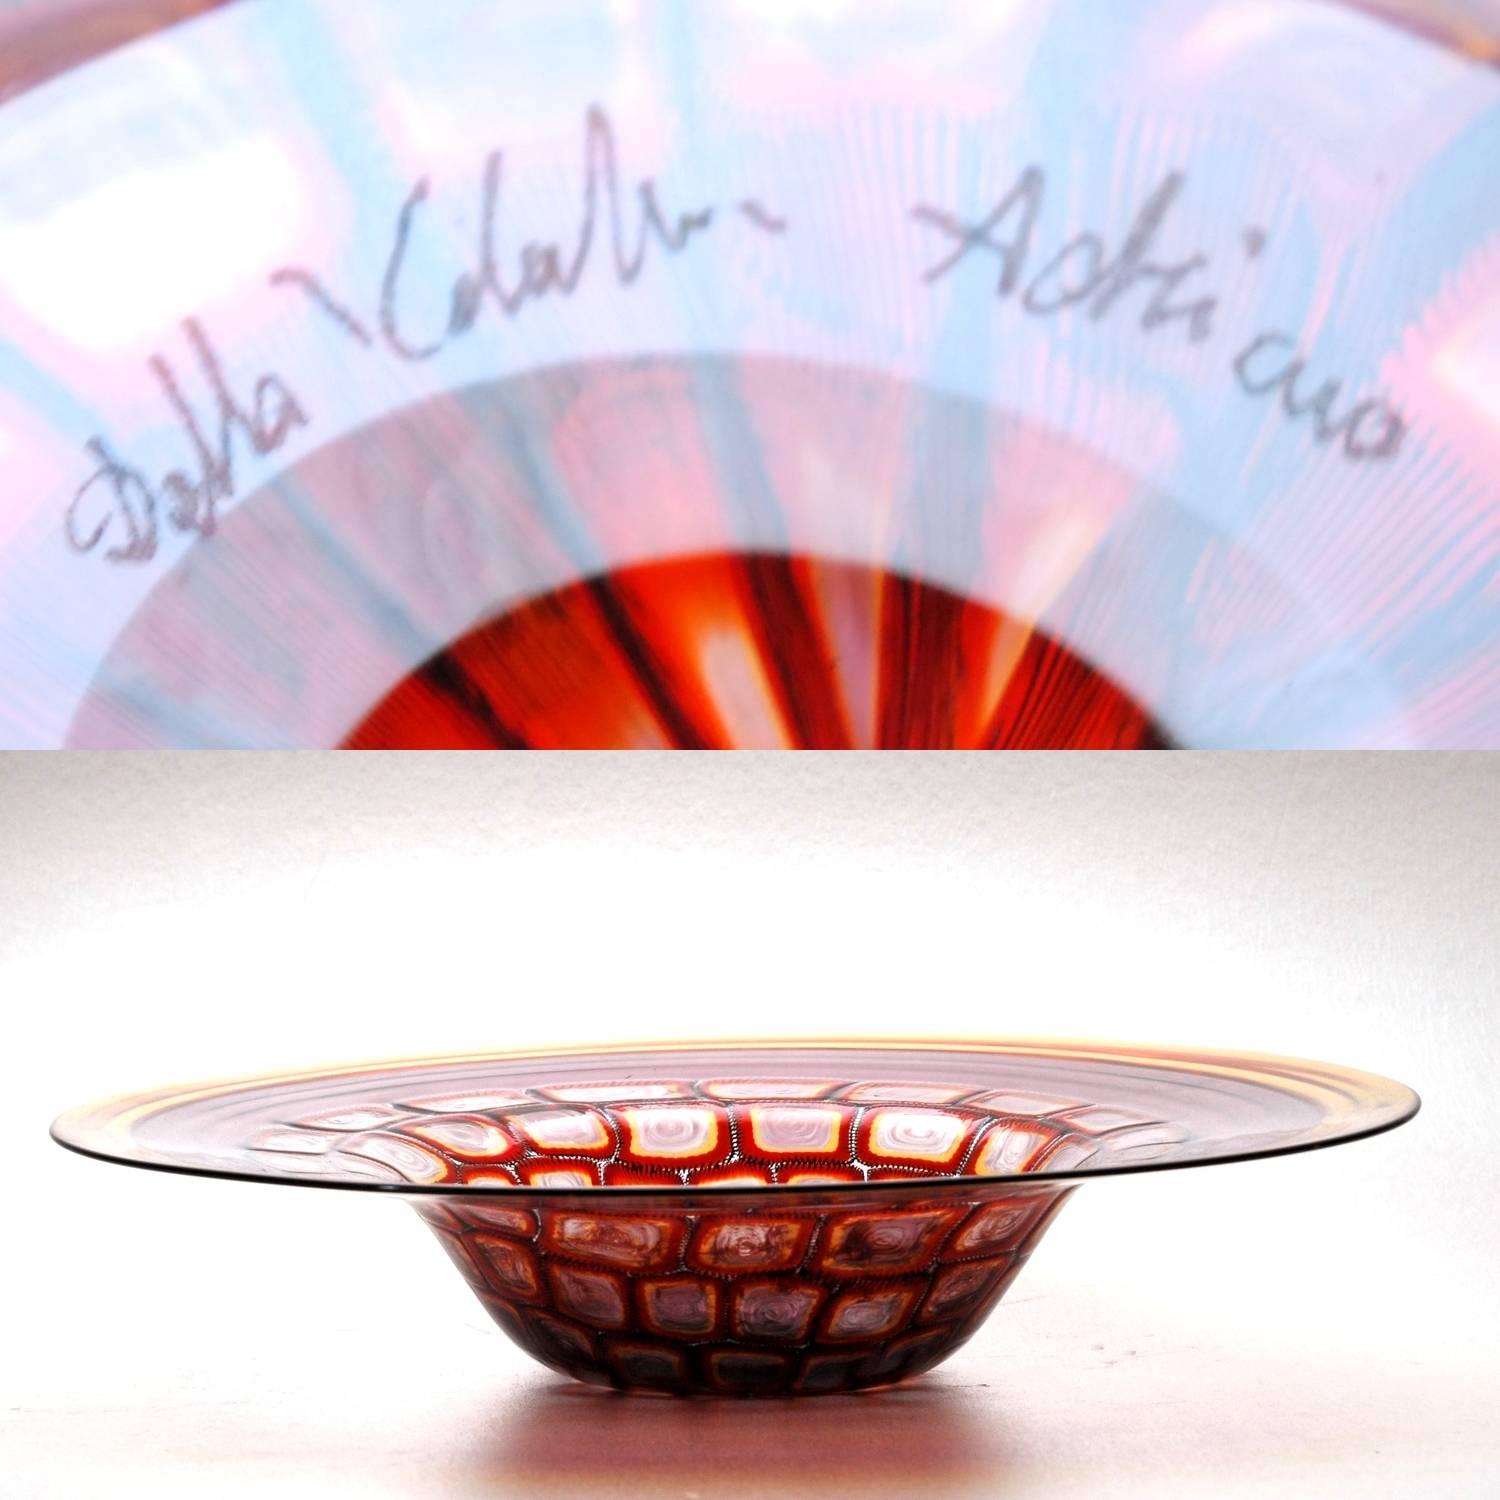 Here a beautiful bowl signed by Adriano dalla Valentina, Muranese master specialized in self made murrinas objects and sculptures. The bowl lip has two bands of amber and amethyst with a striking central part paved with murrinas. These are made with